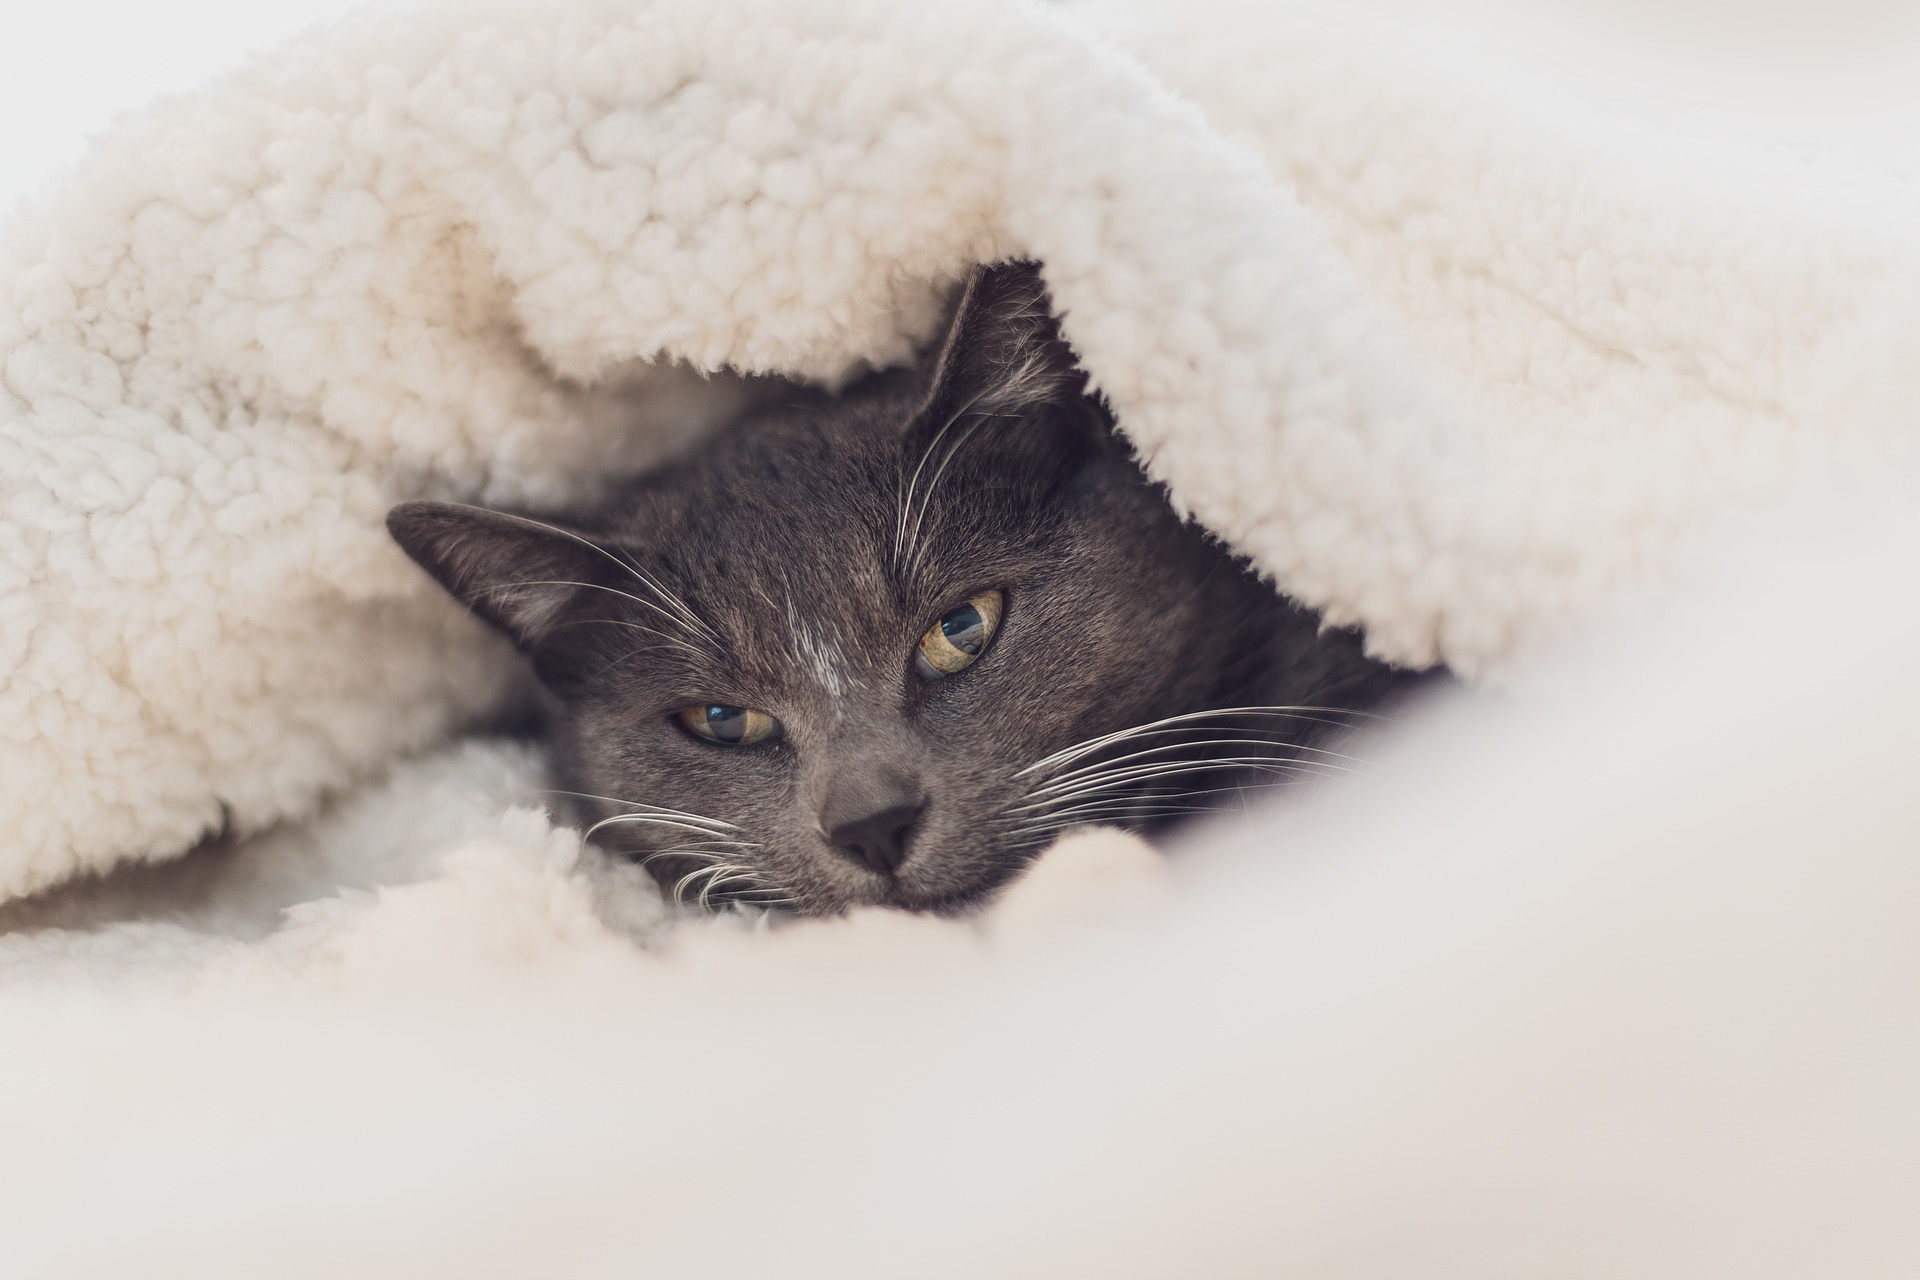 Cats need care in winter to avoid illnesses and accidents